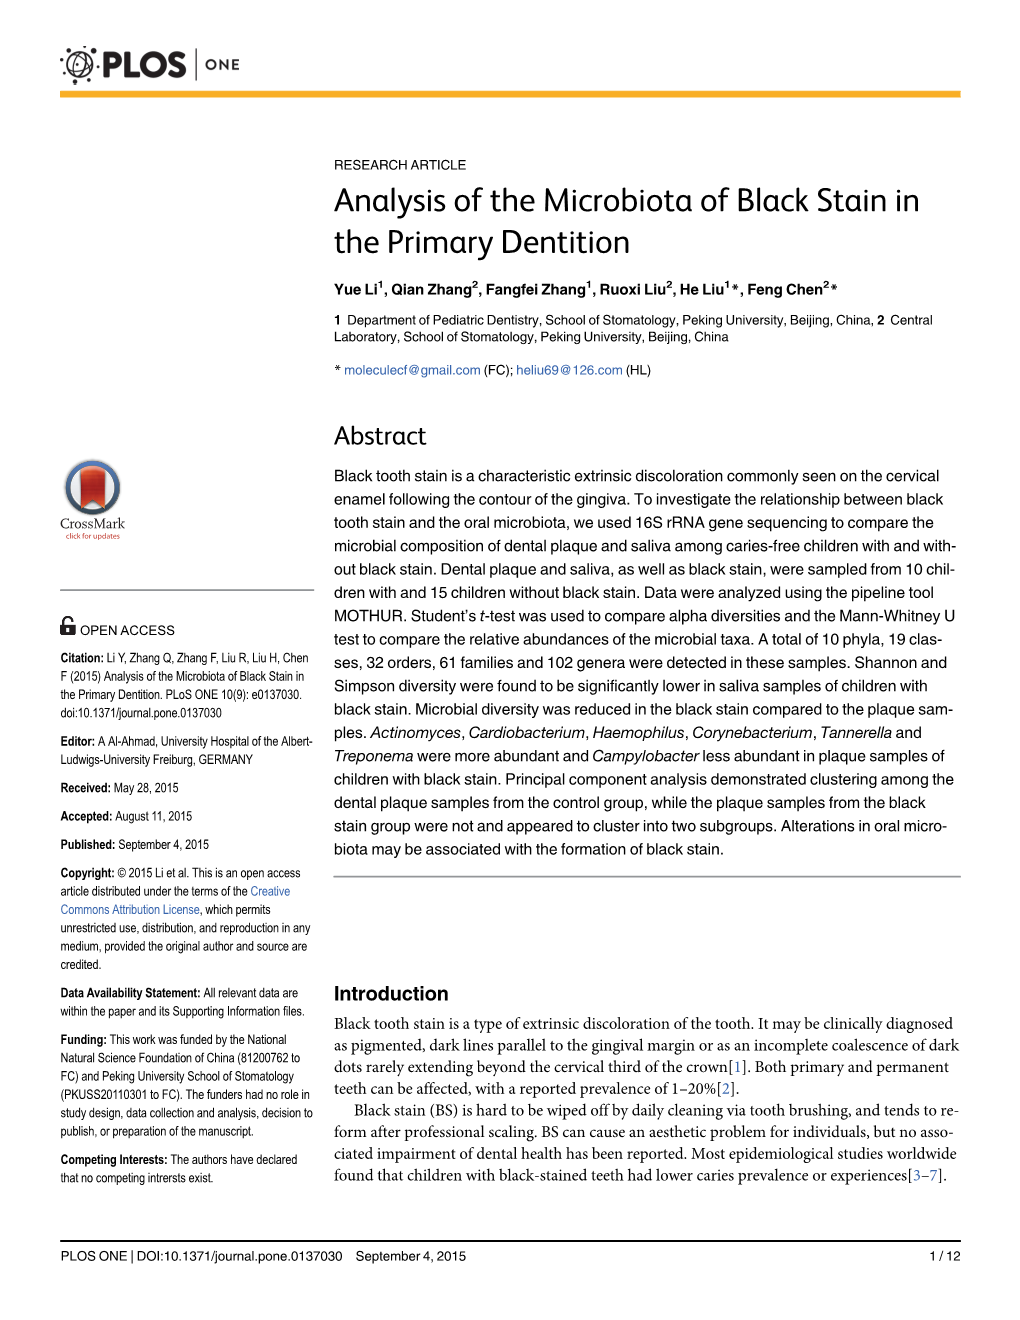 Analysis of the Microbiota of Black Stain in the Primary Dentition